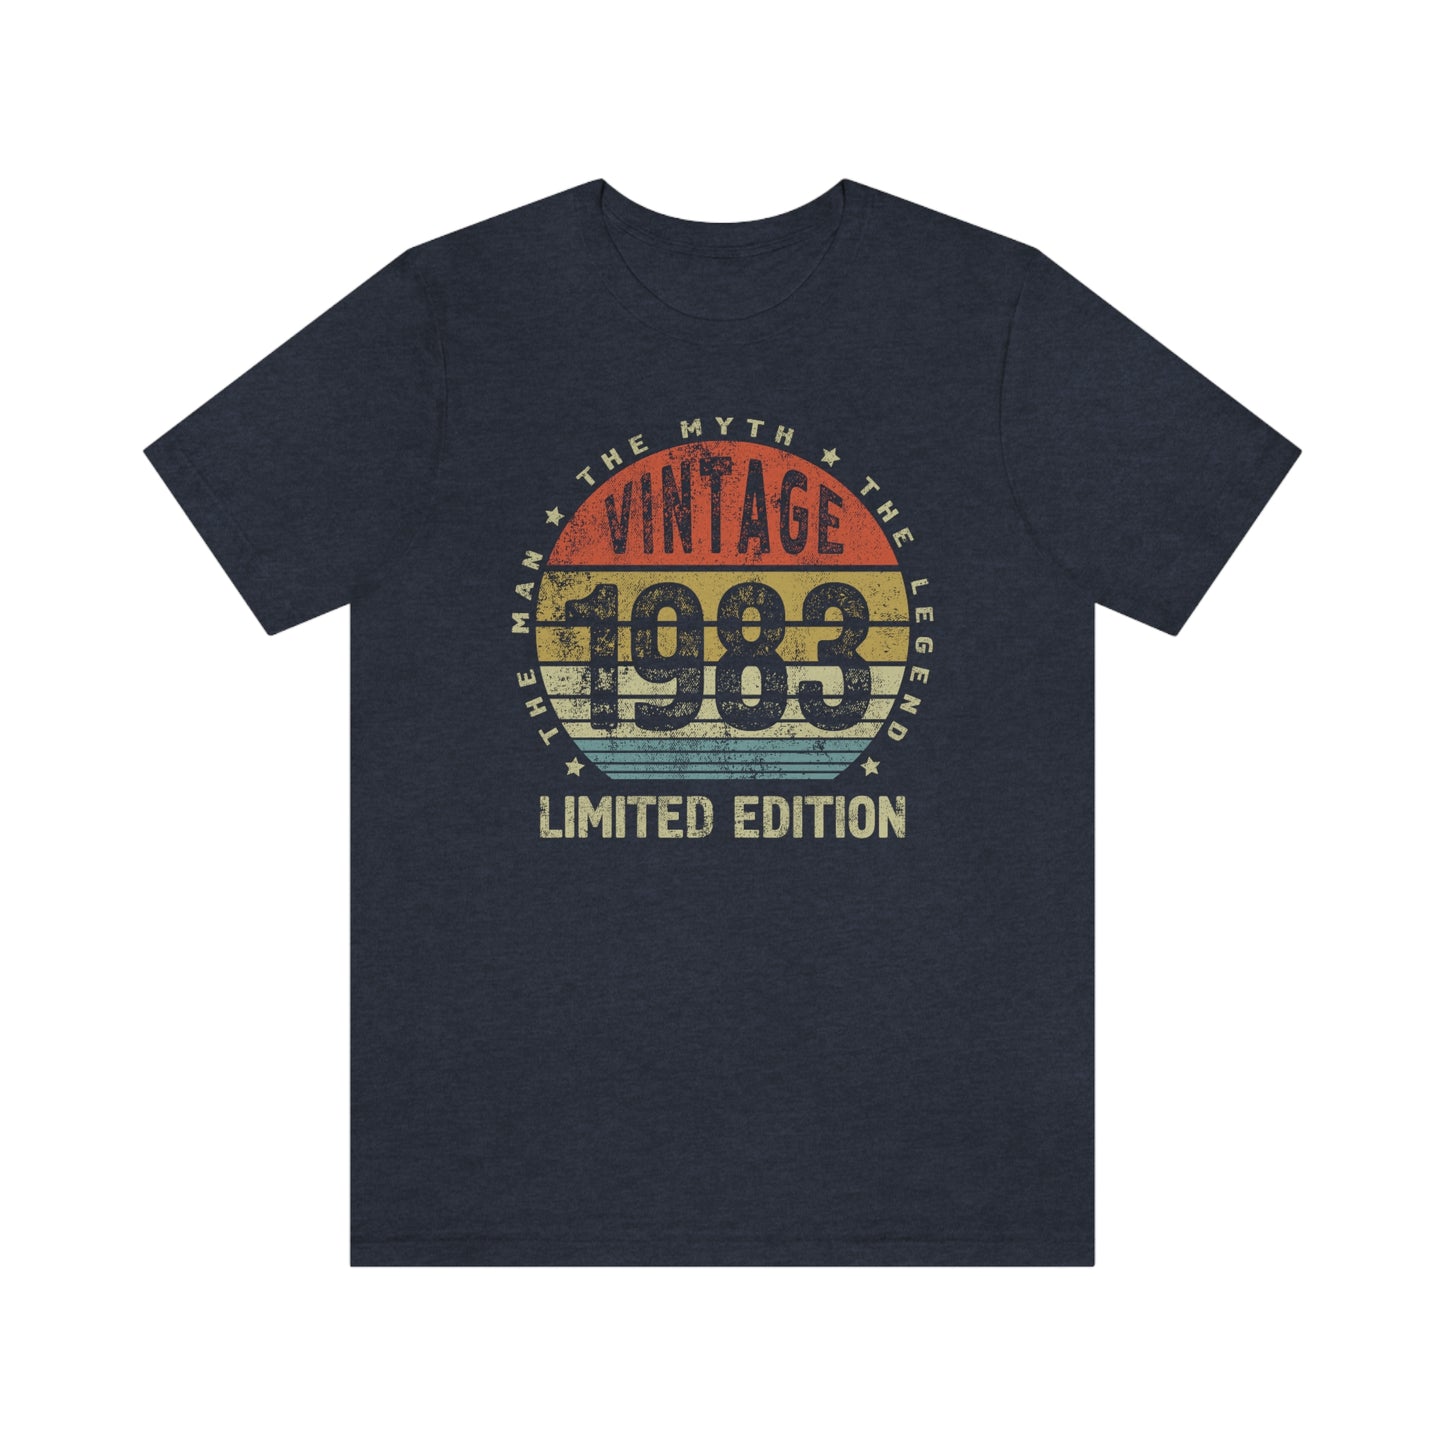 40th birthday gifts for men, Vintage 1983 Shirt for brother or husband,  The Man The Myth The Legend - 37 Design Unit